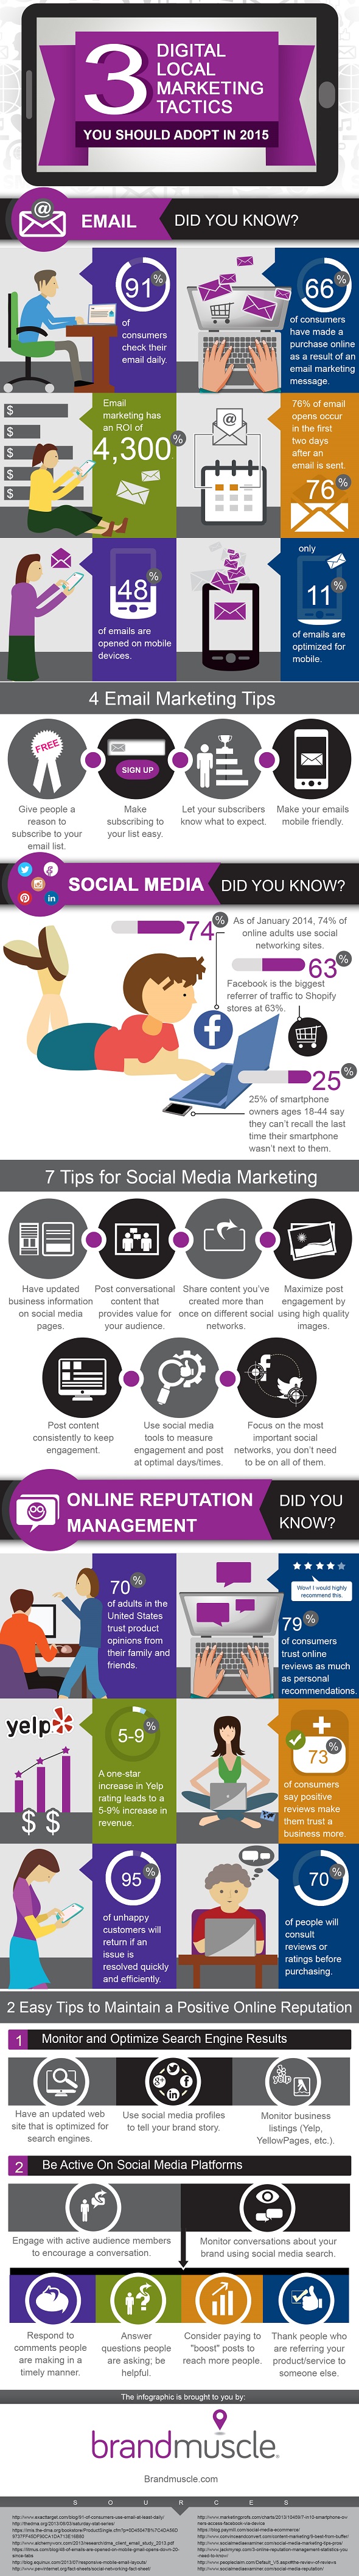 Local-Marketing-Channels-Infographic_590px